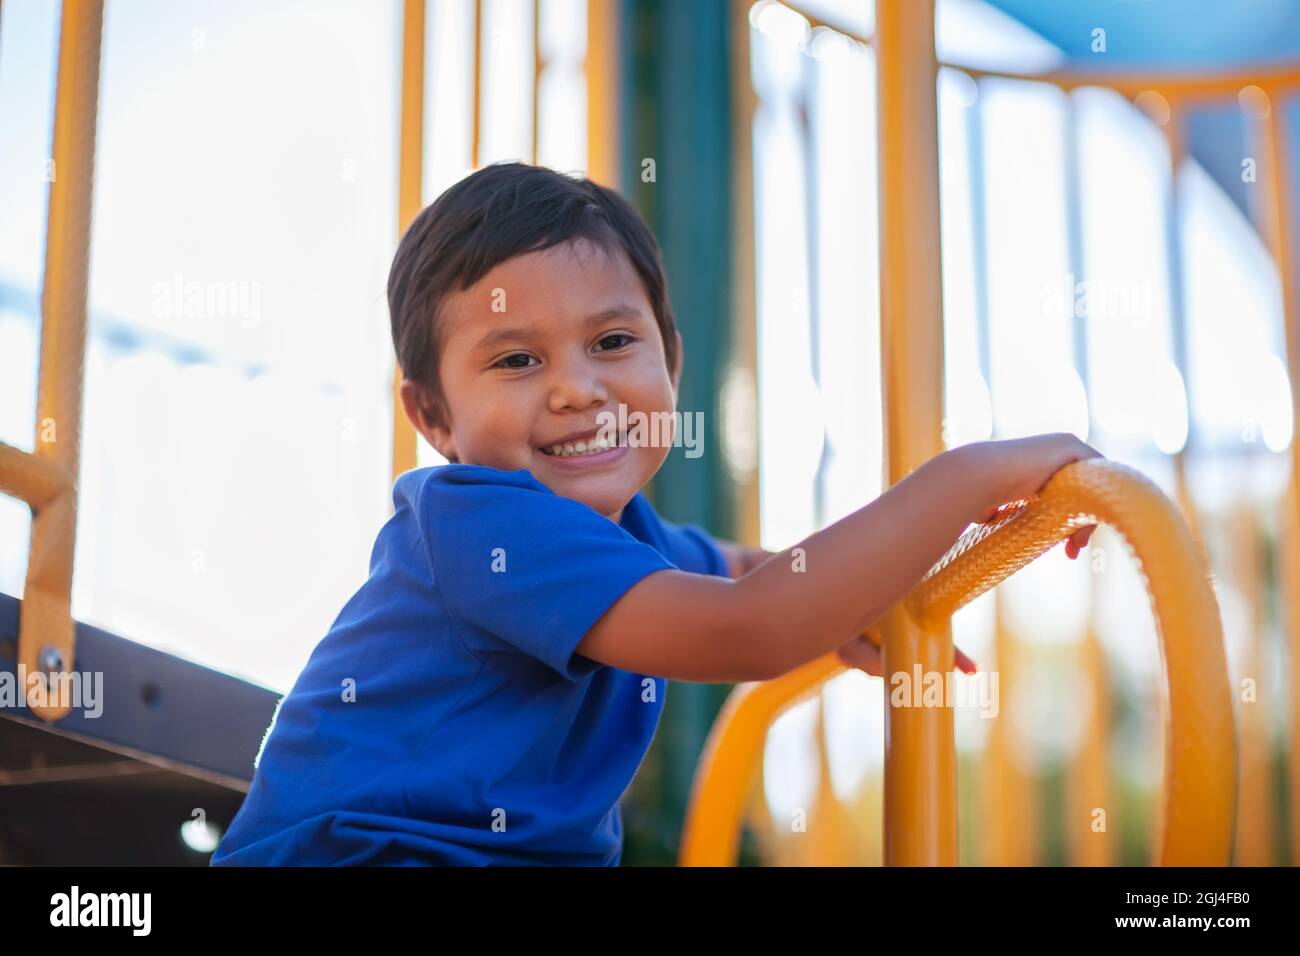 Young boy looking down and smiling while having fun climbing a jungle gym monkey bar. Stock Photo